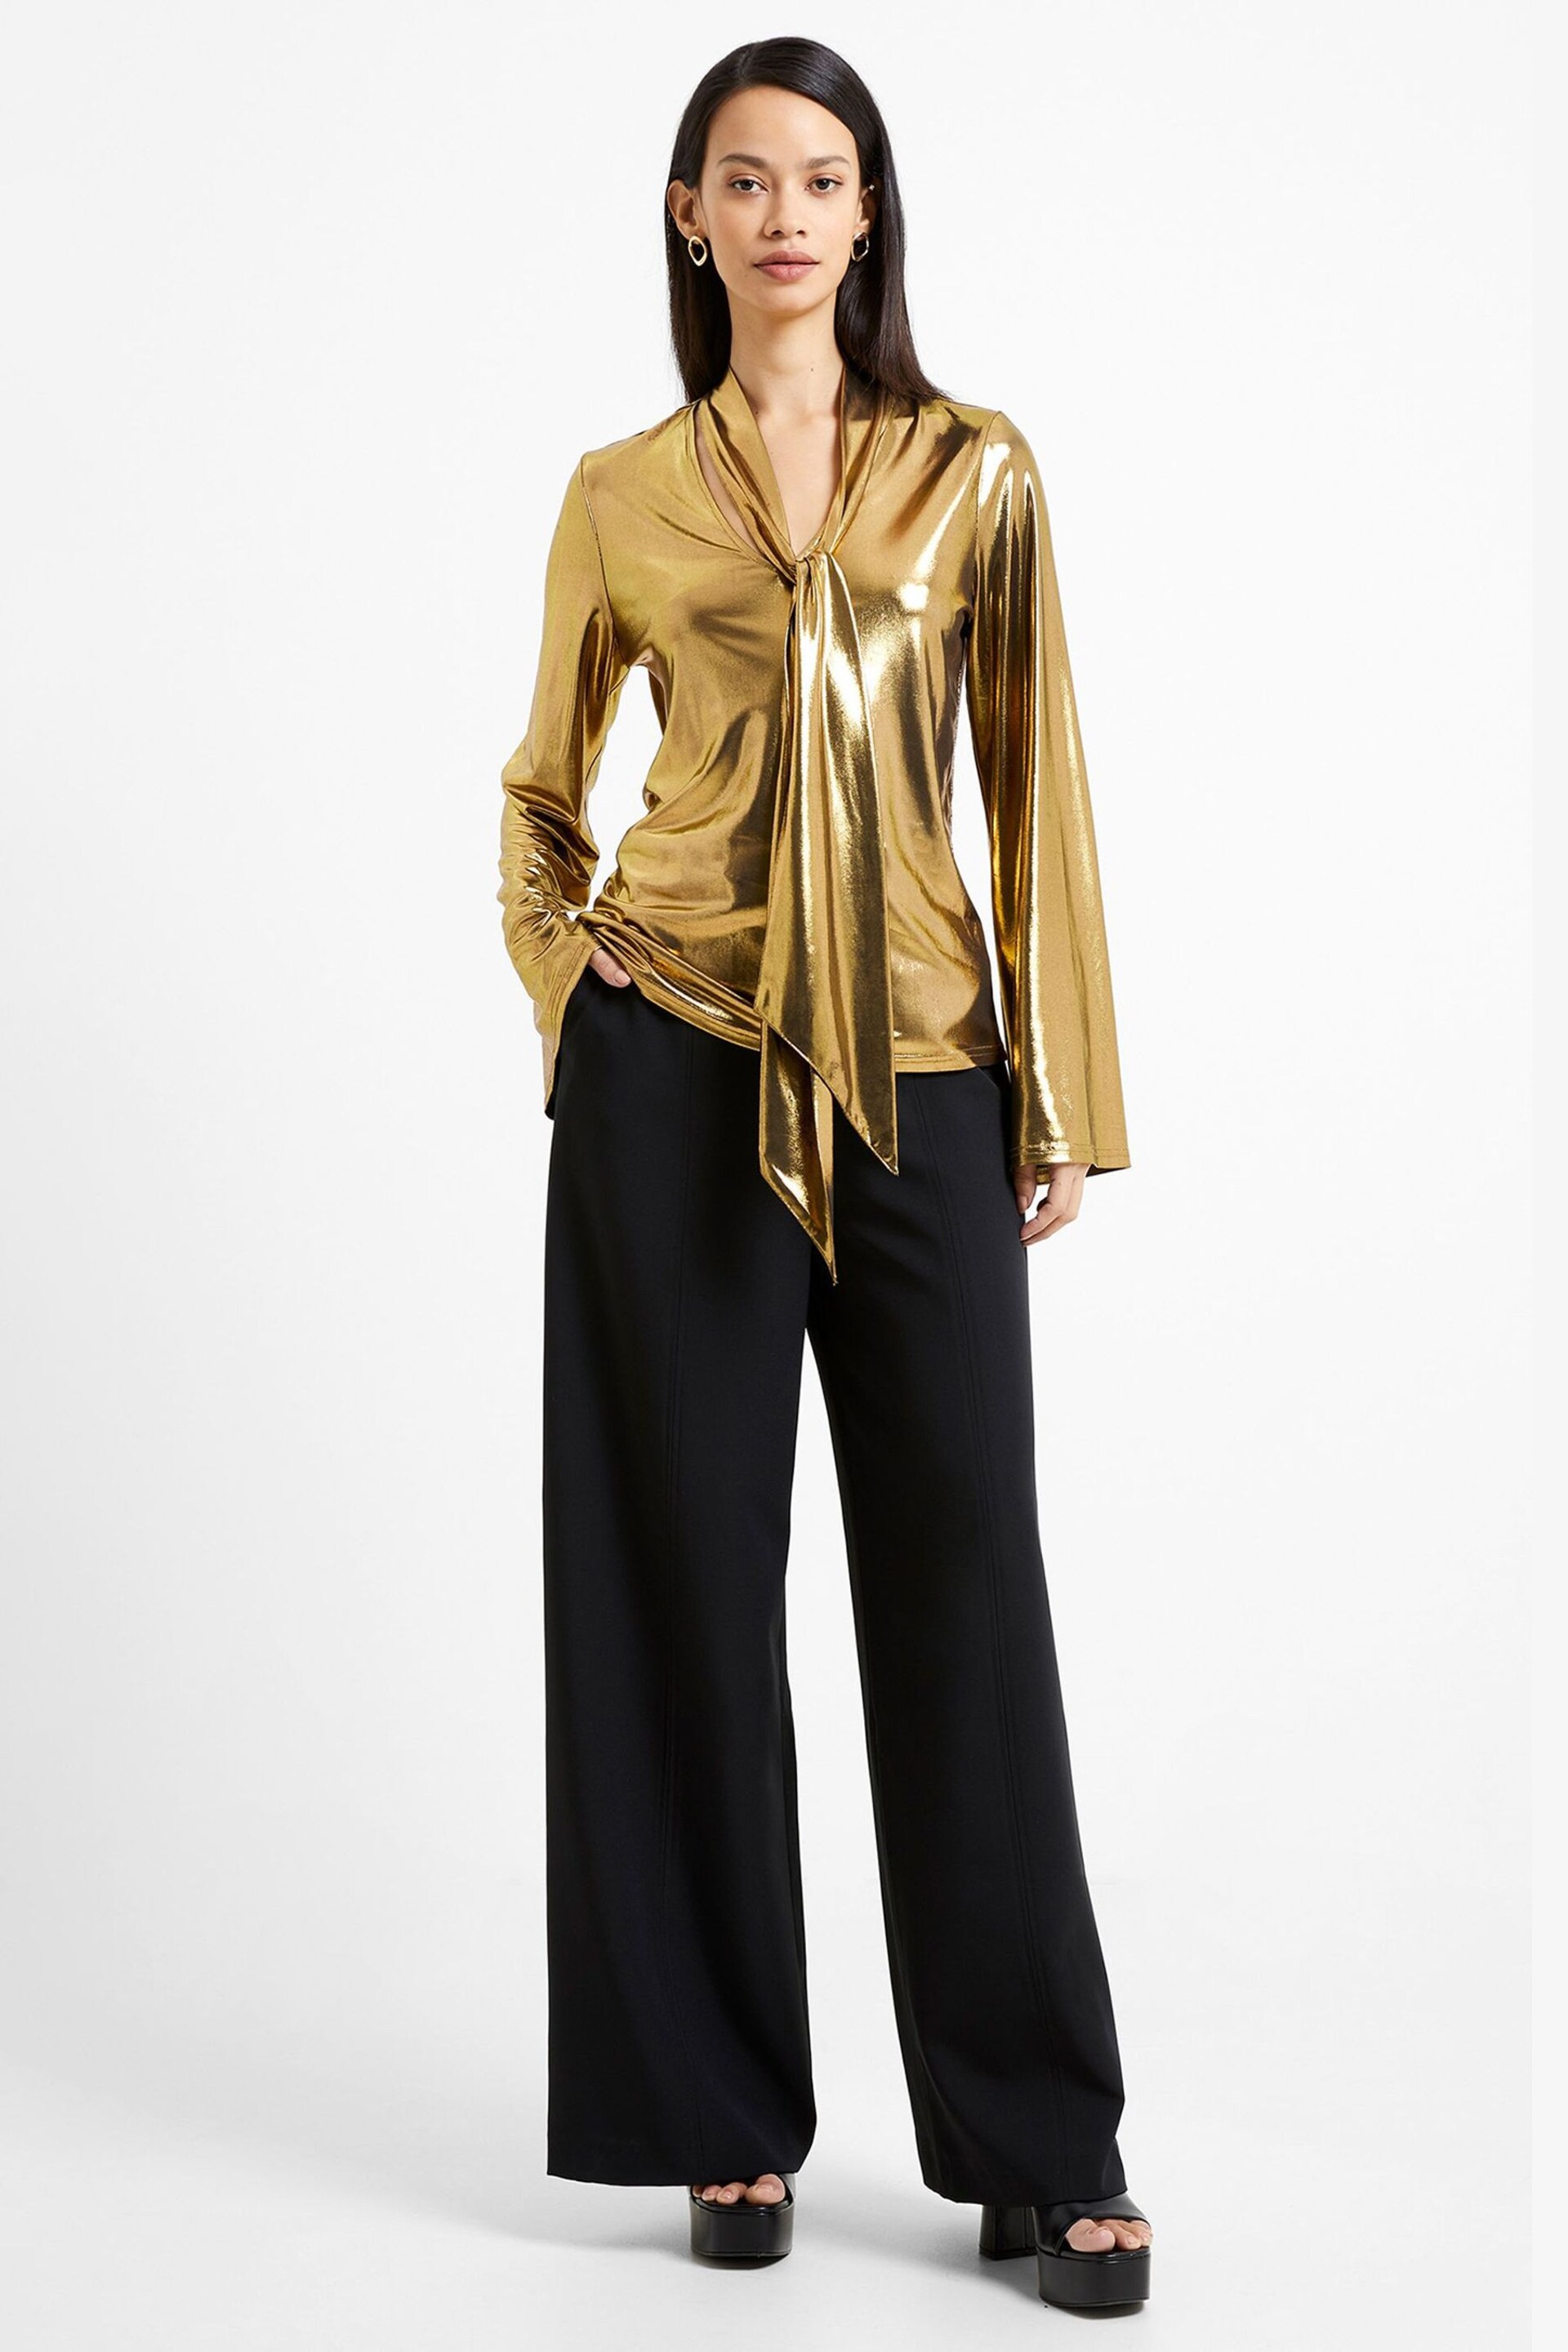 French Connection Ronja Liquid Metallic Blouses - Image 3 of 4